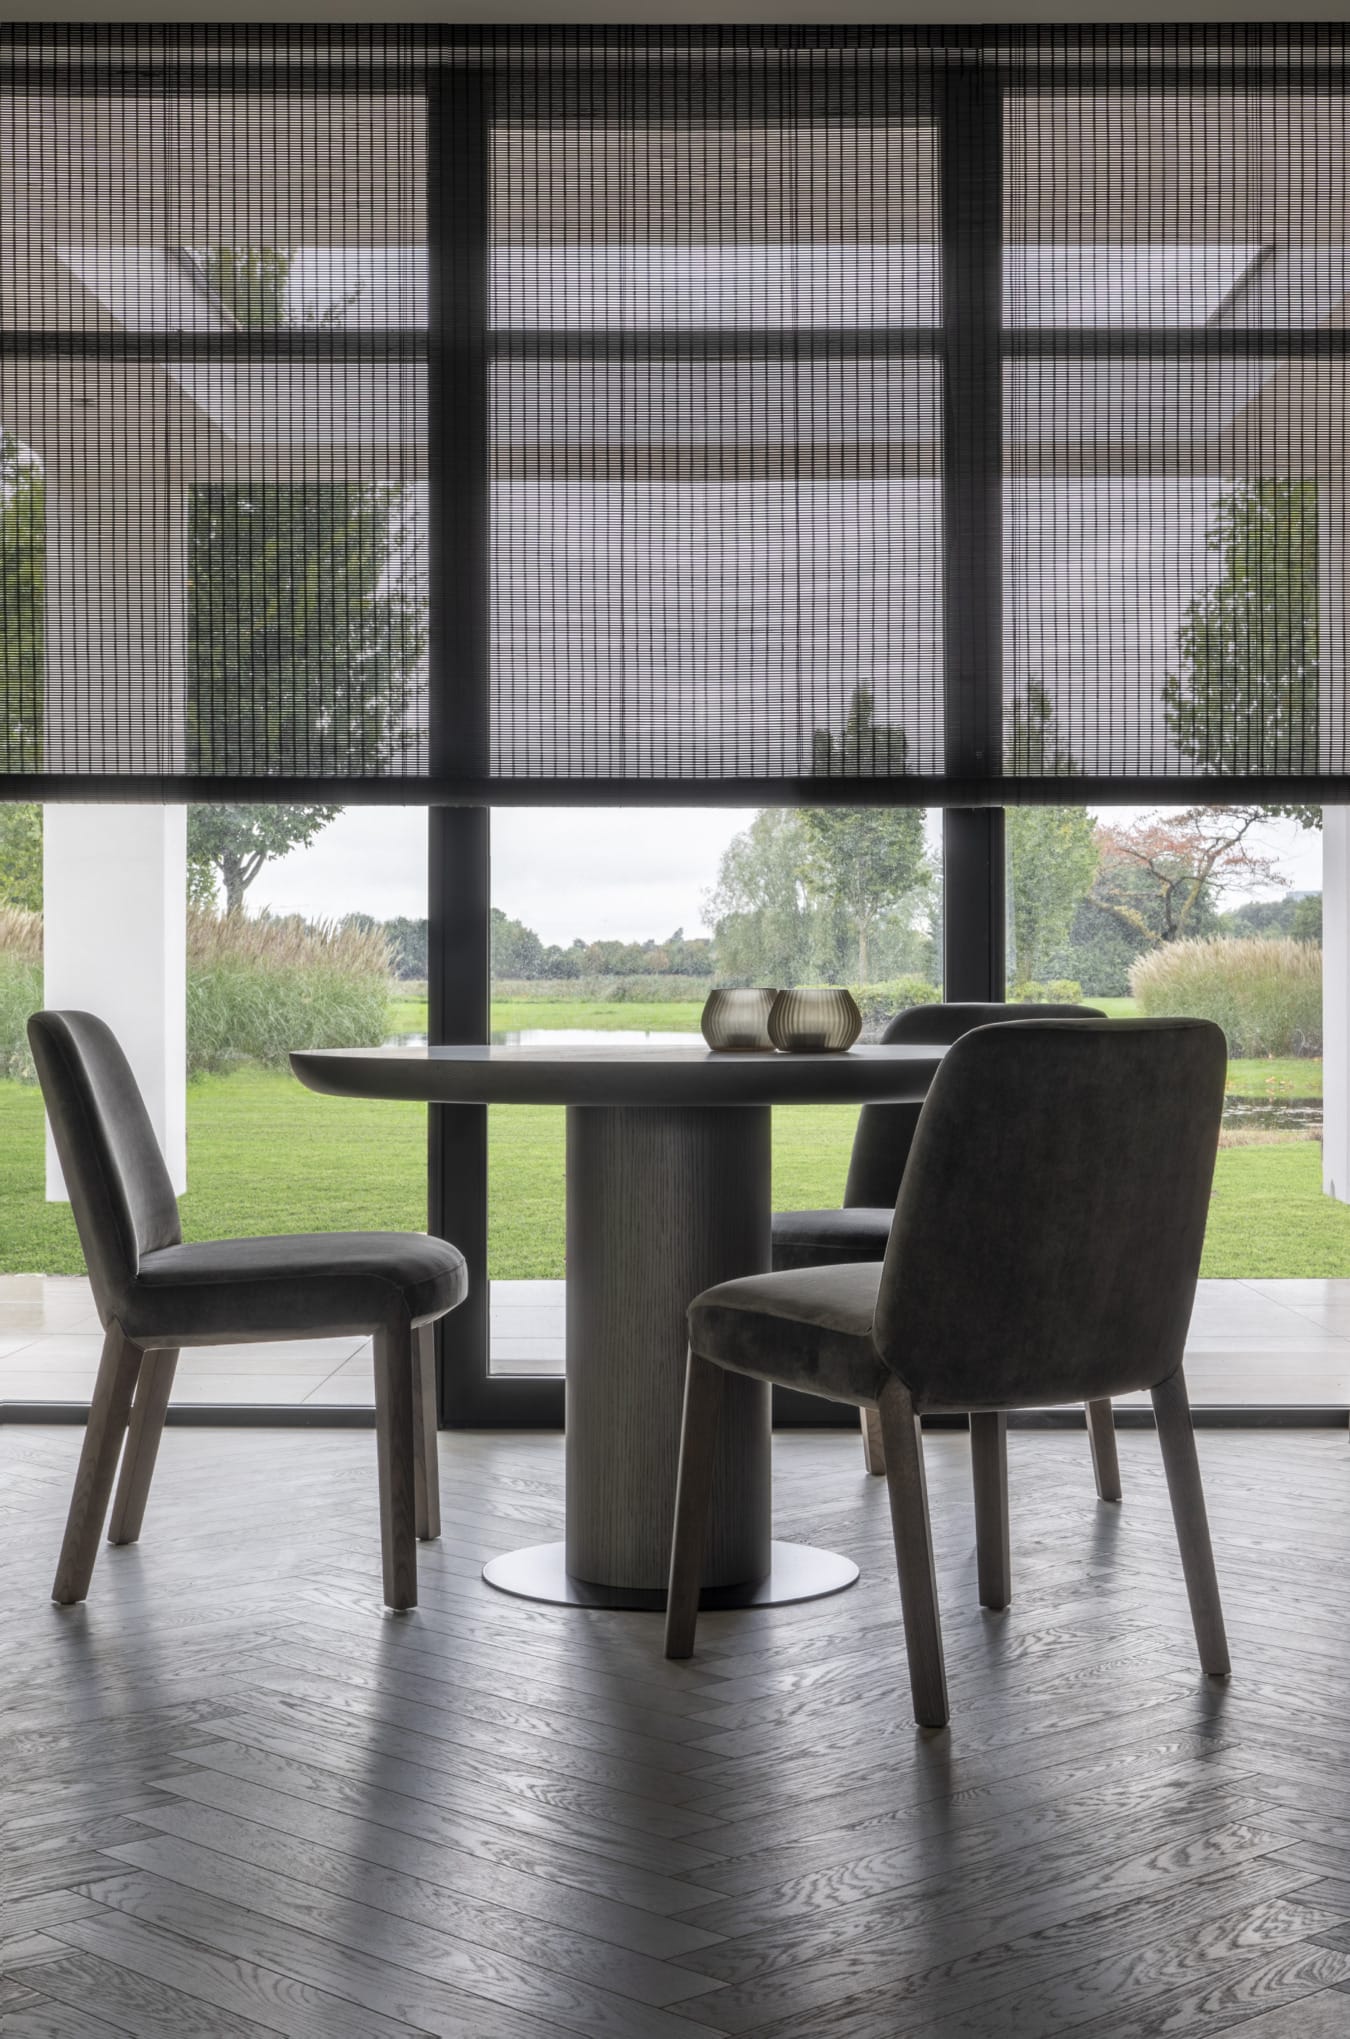 Woodweave Blinds Piet Boon by Zonnelux